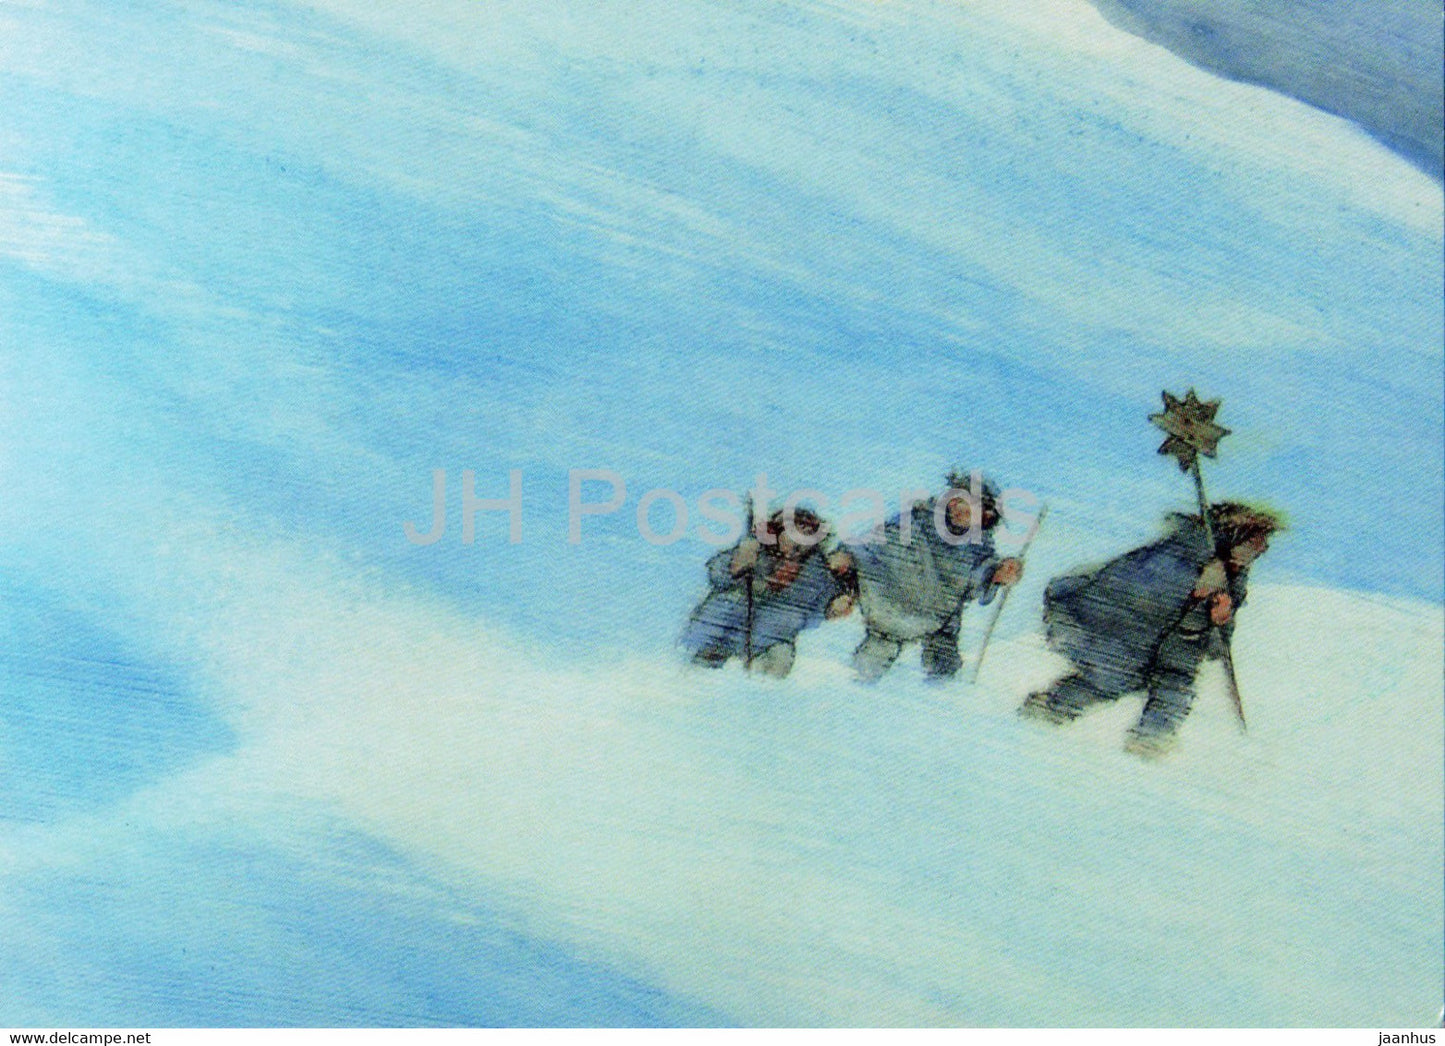 Christmas Greeting Card - Frohe Weihnachten - winter wanderers - Germany - unused - JH Postcards